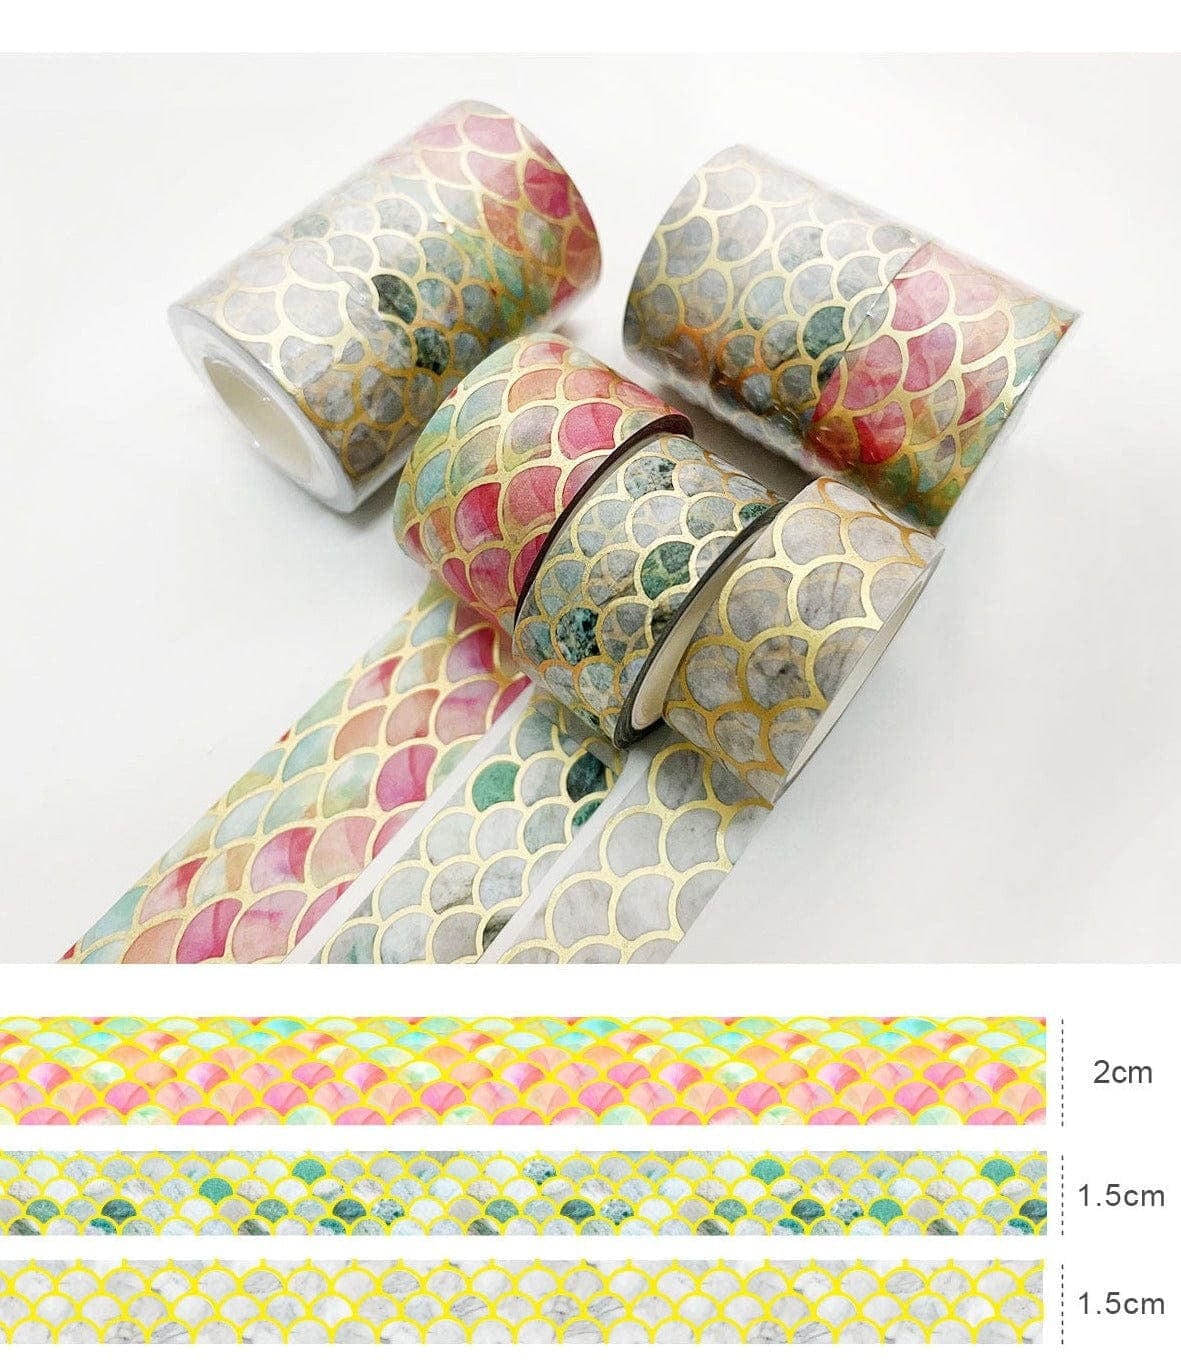 KUMA Stationery & Crafts  Stationery Gold Foil Washi Tape Collection: 8 sets to choose from